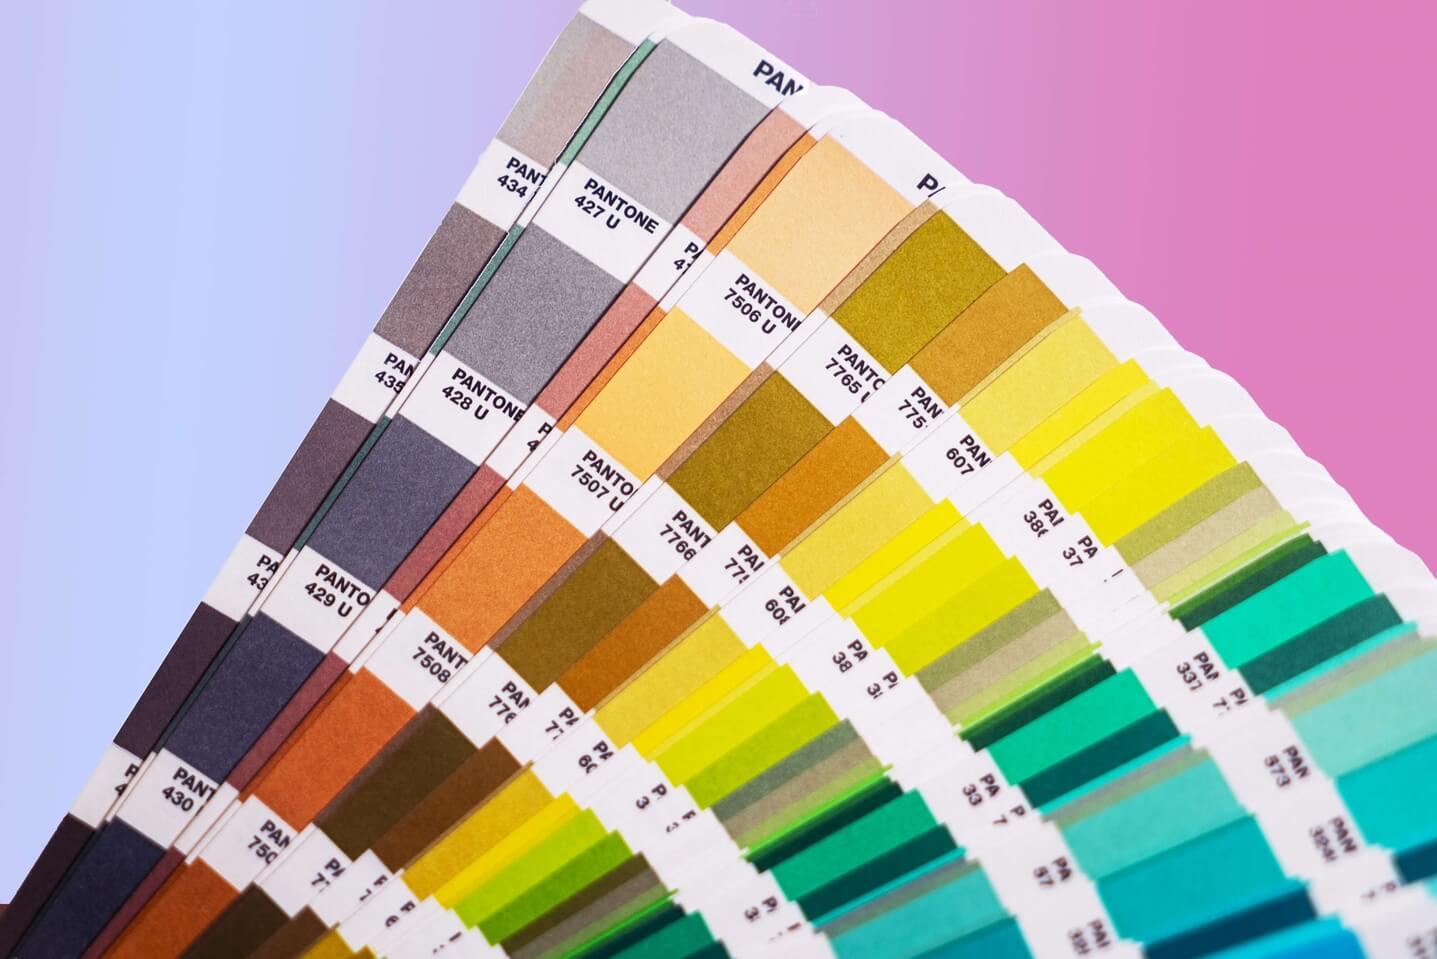 50 Unforgettable Color Palettes to Help You Design Your Own